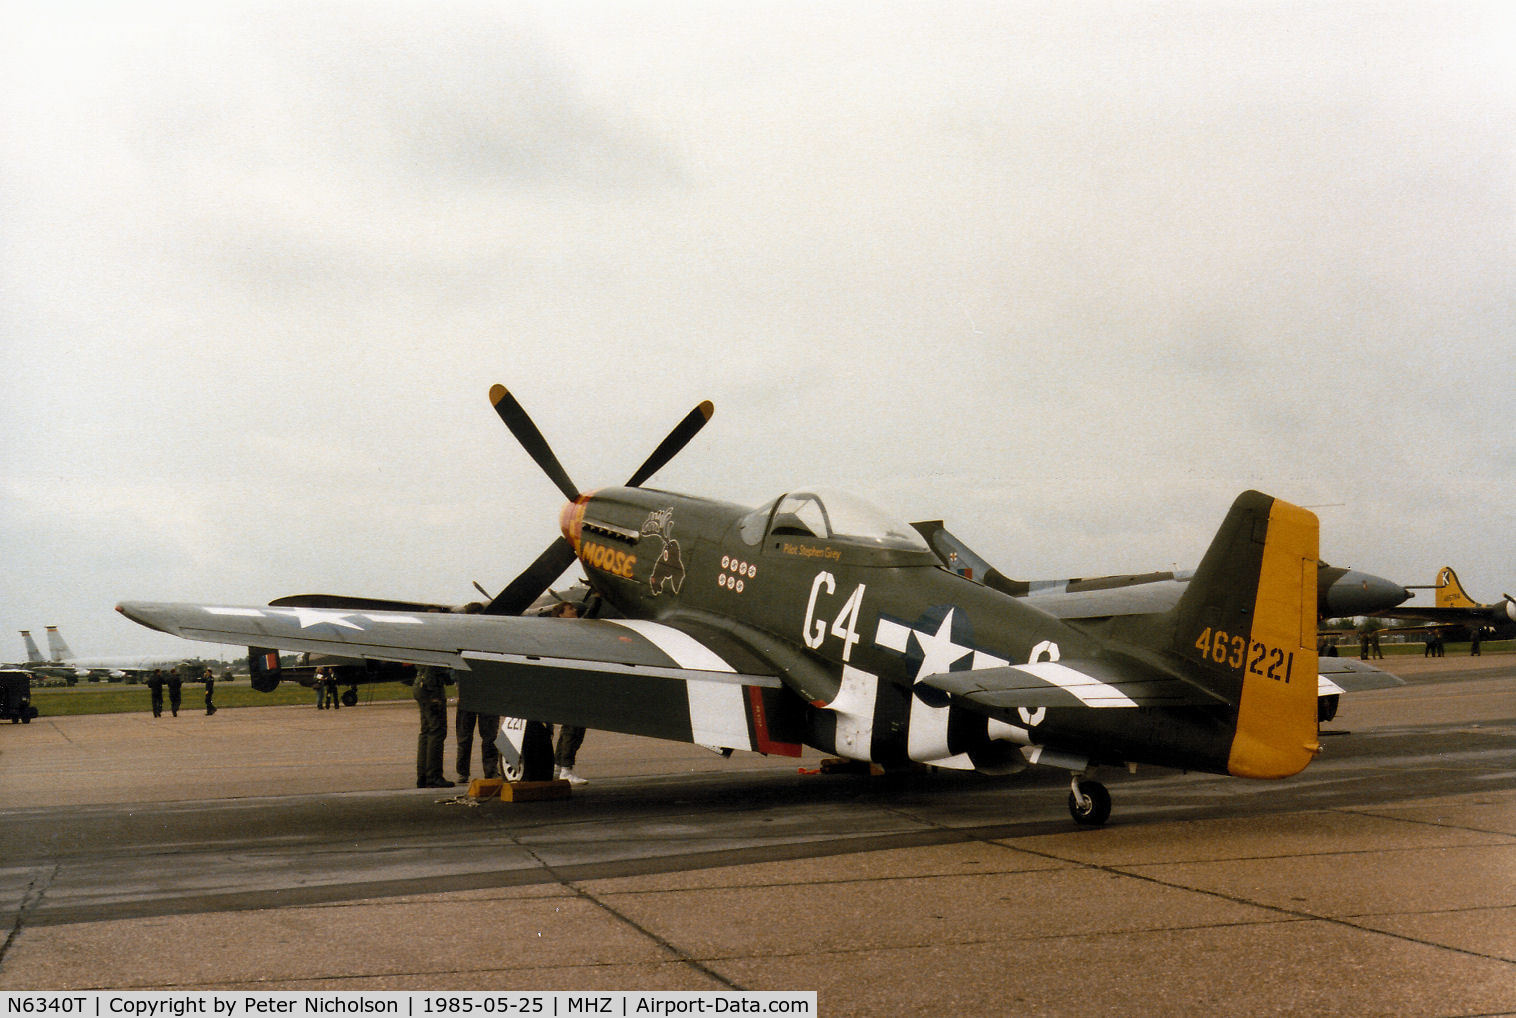 N6340T, 1944 North American P-51D Mustang C/N 122-39608, P-51D Mustang 44-63221 on display at the 1985 RAF Mildenhall Air Fete.